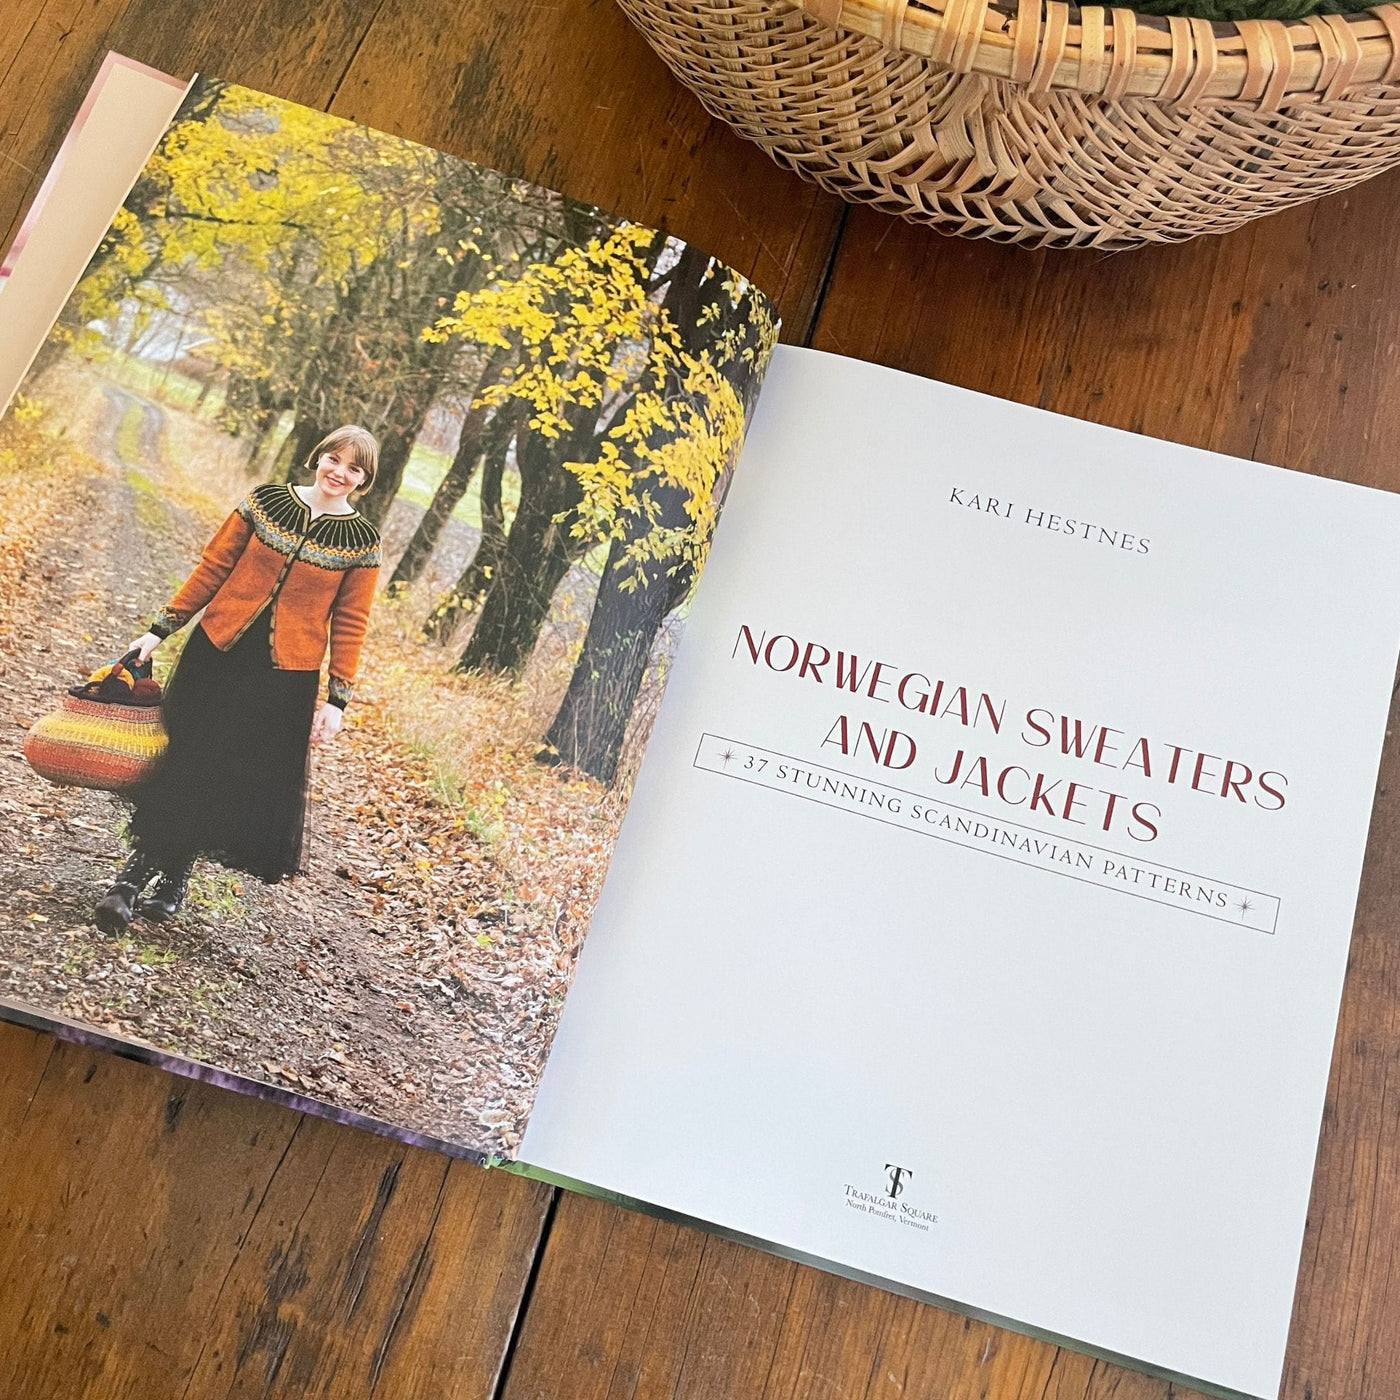 Inside pages of book Norwegian Sweaters & Jackets by Kari Hestnes shows woman wearing wearing colorwork yoke cardigan walking on nature path and title page opposite.